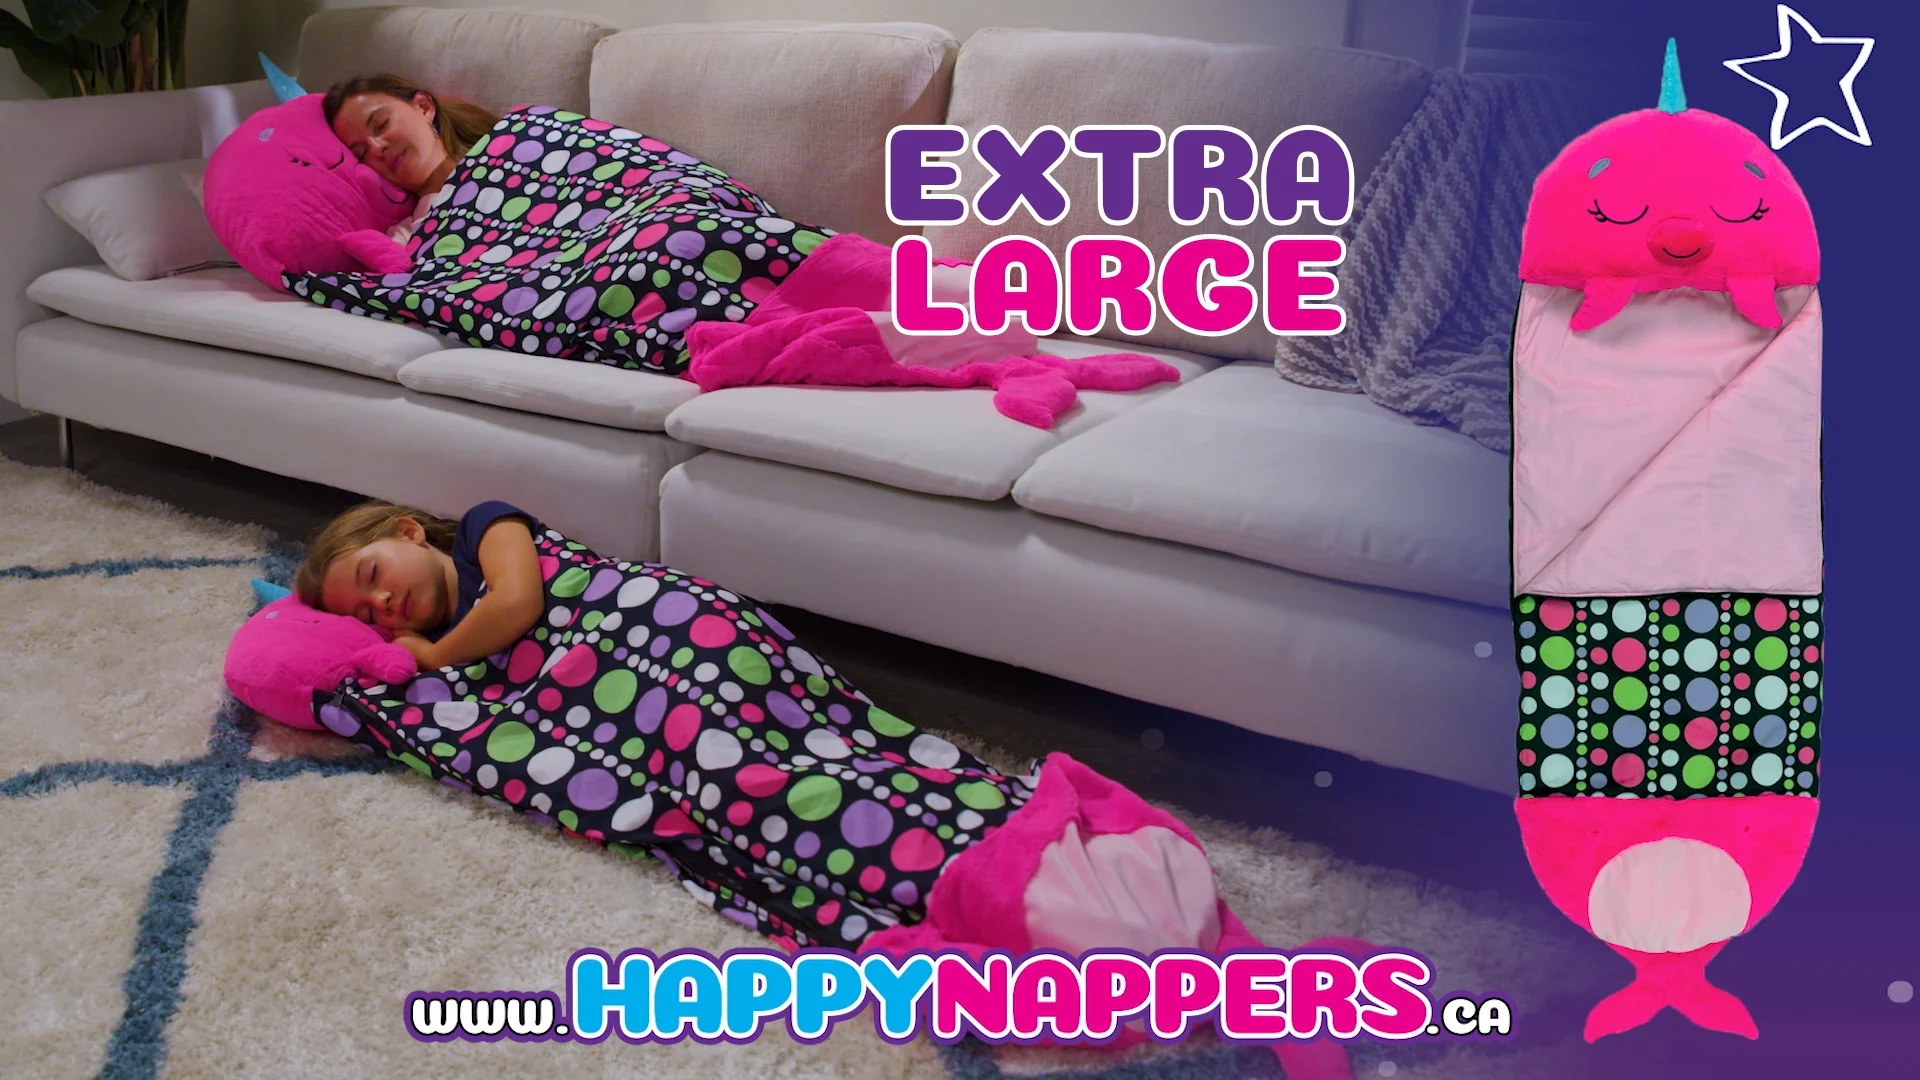 Happy Nappers with New Characters! on Vimeo